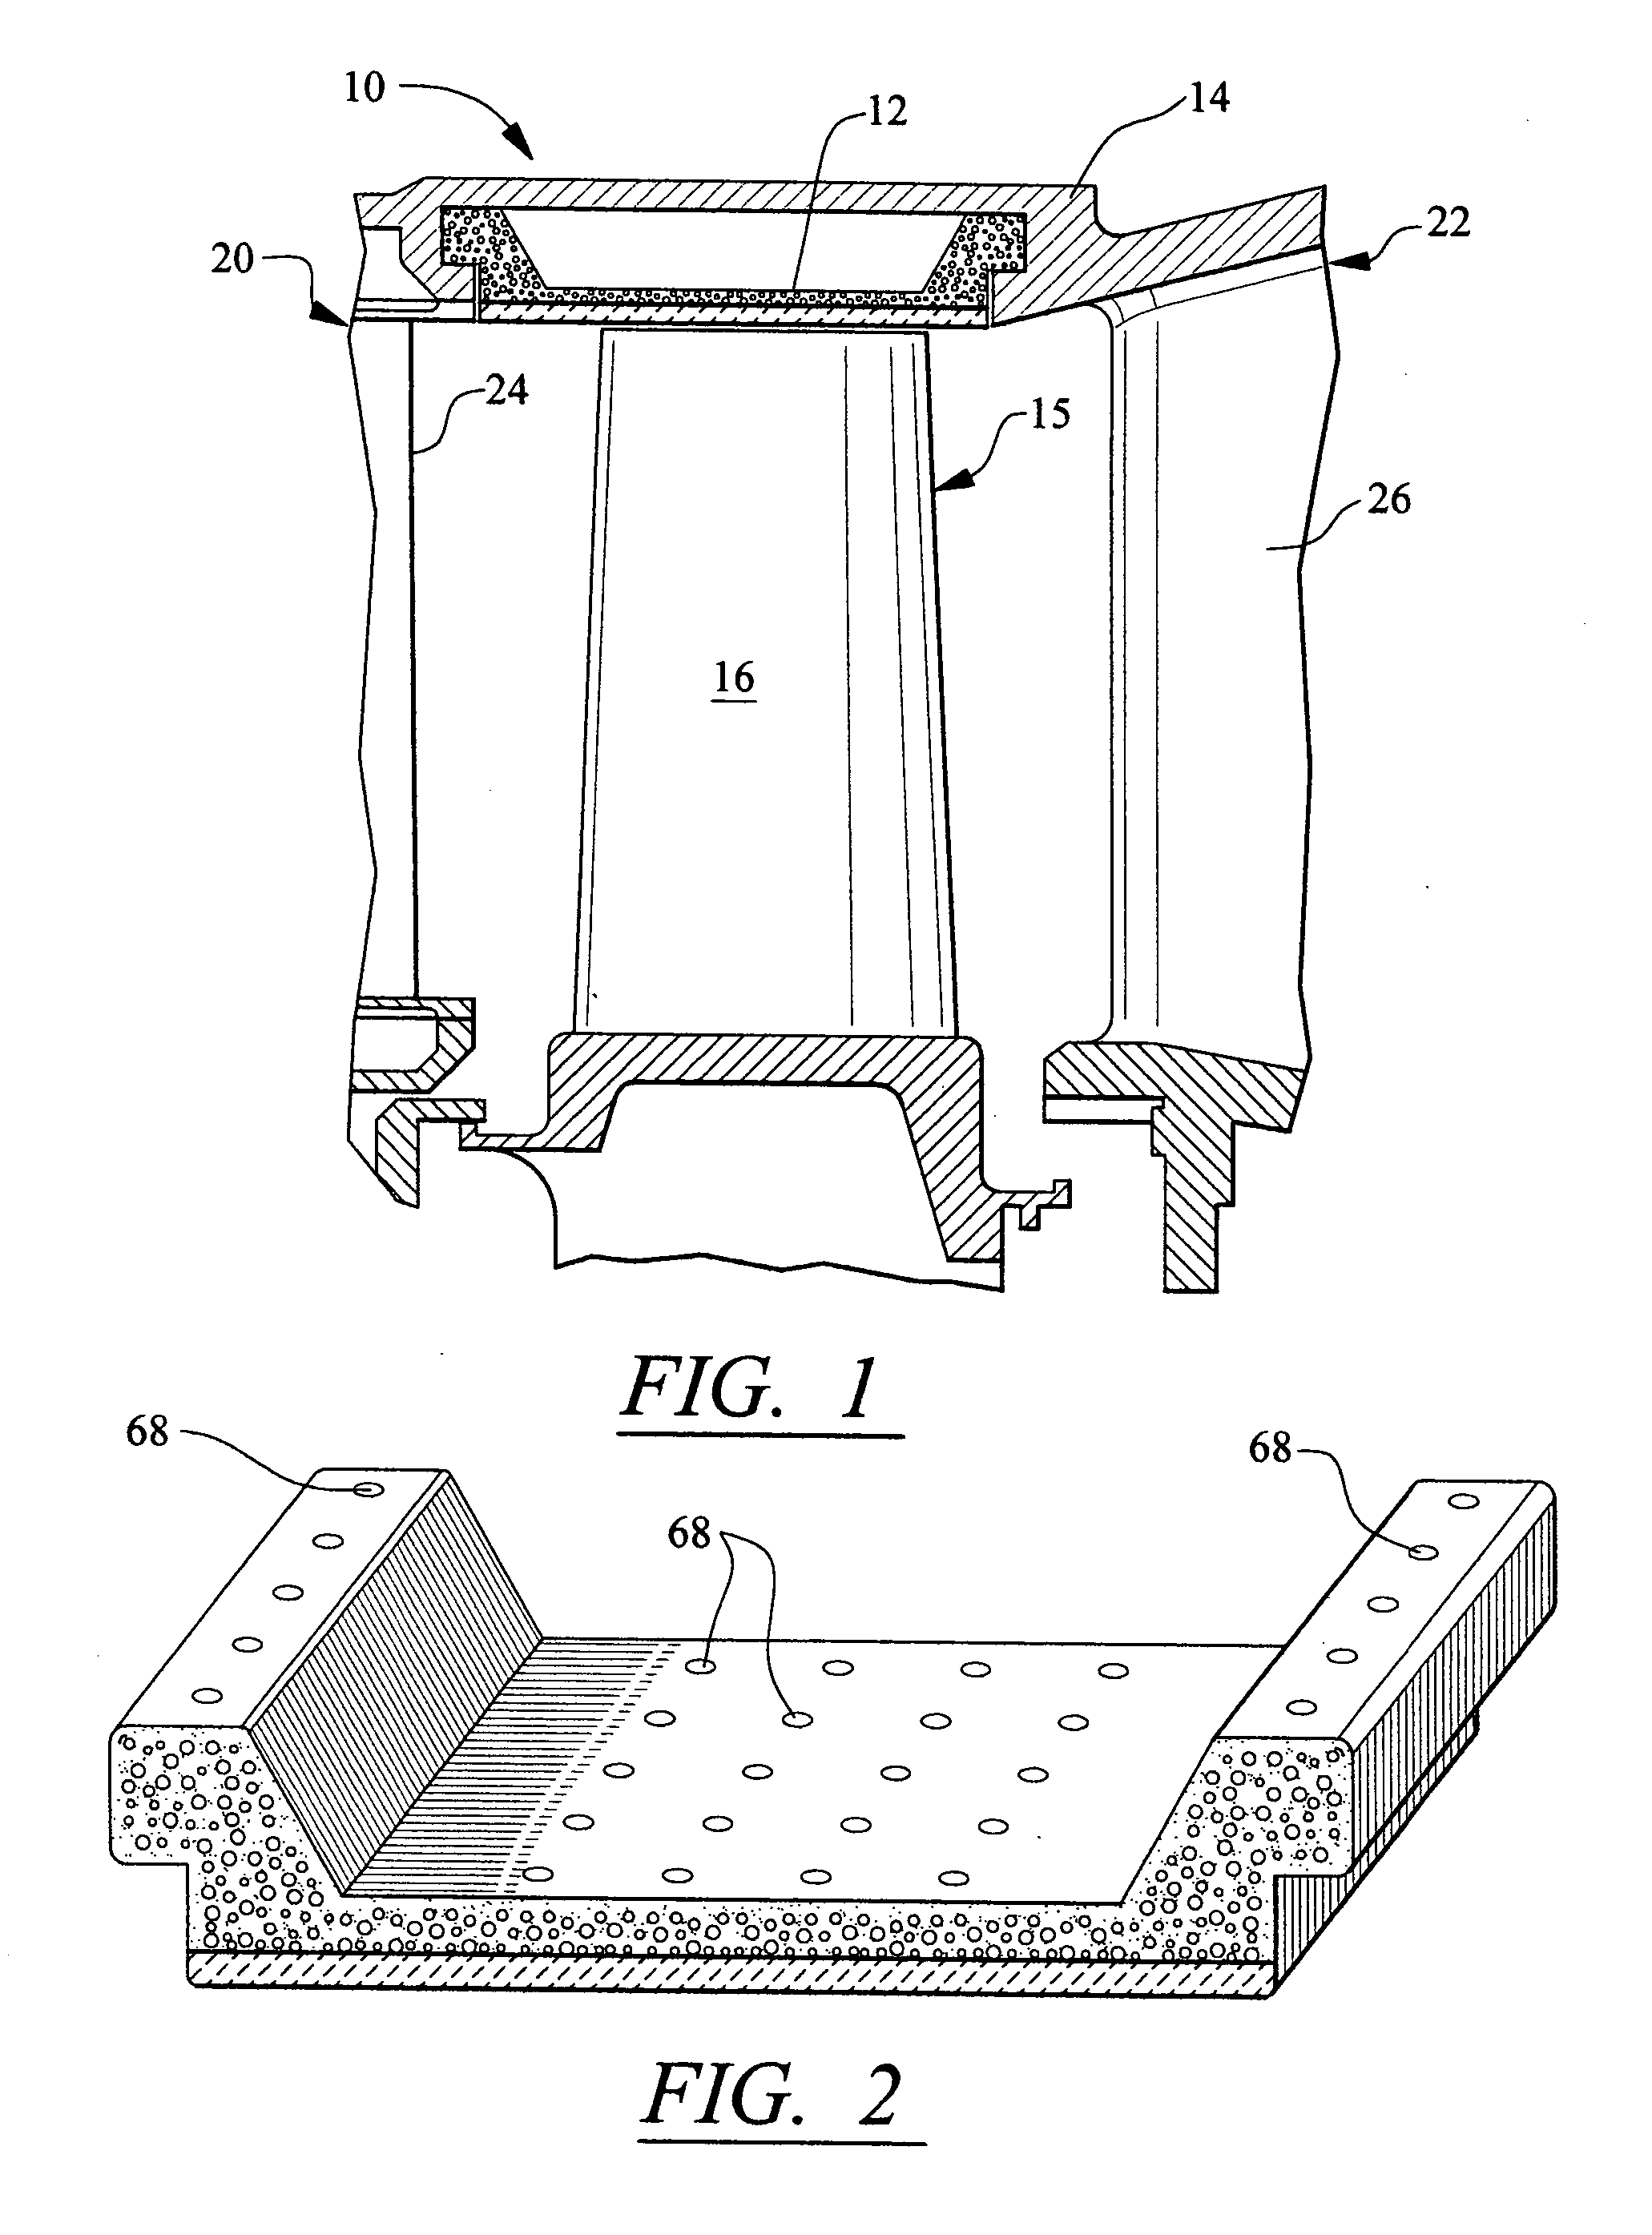 Construction of static structures for gas turbine engines